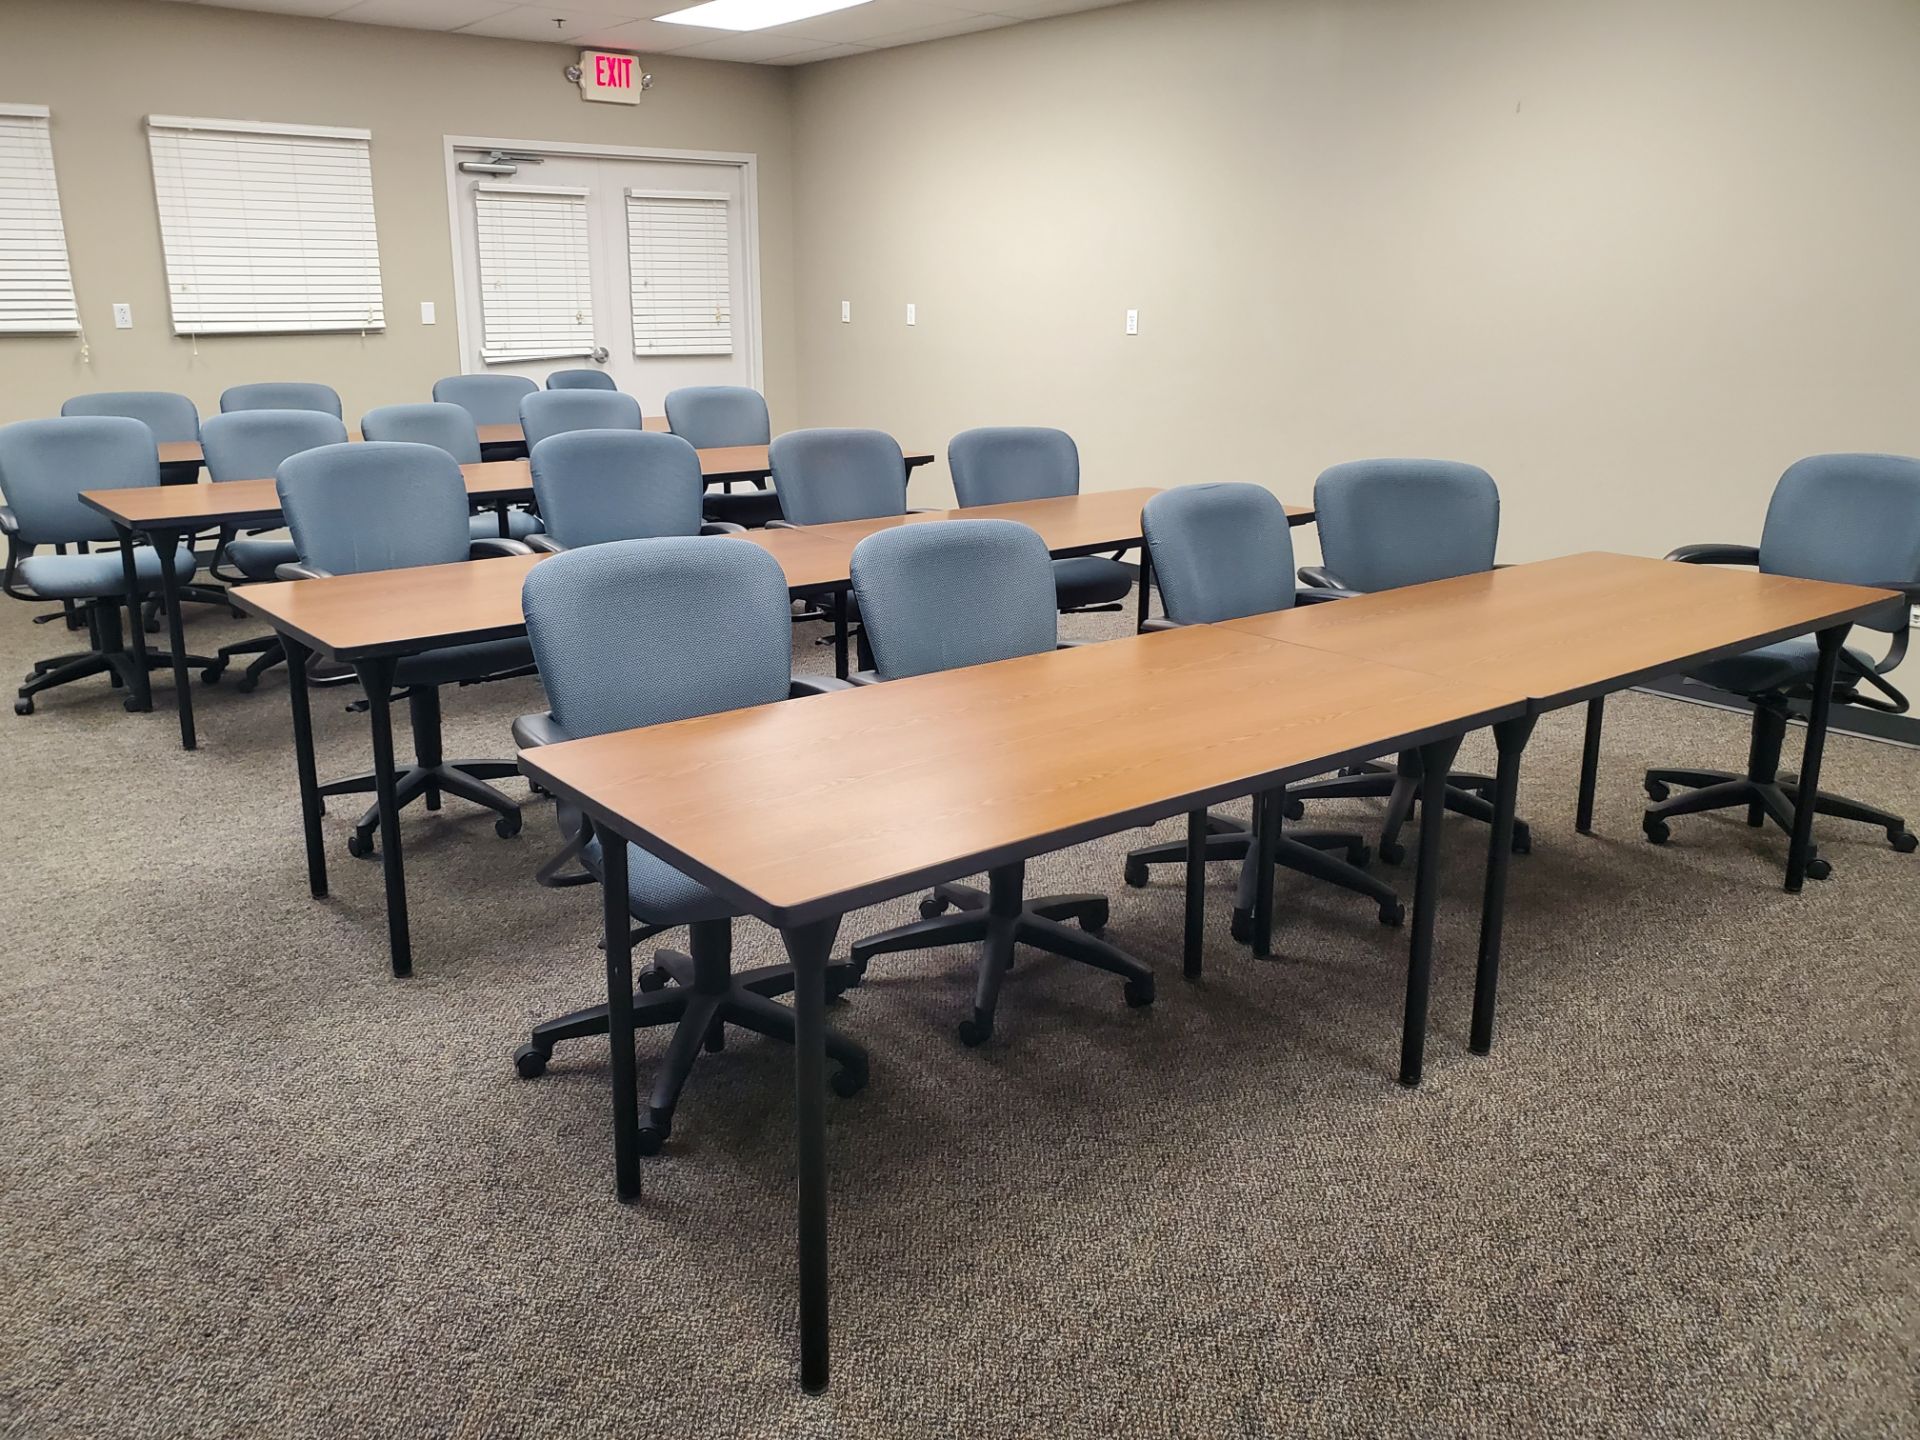 Conference Room Tables and Chairs as Pictured